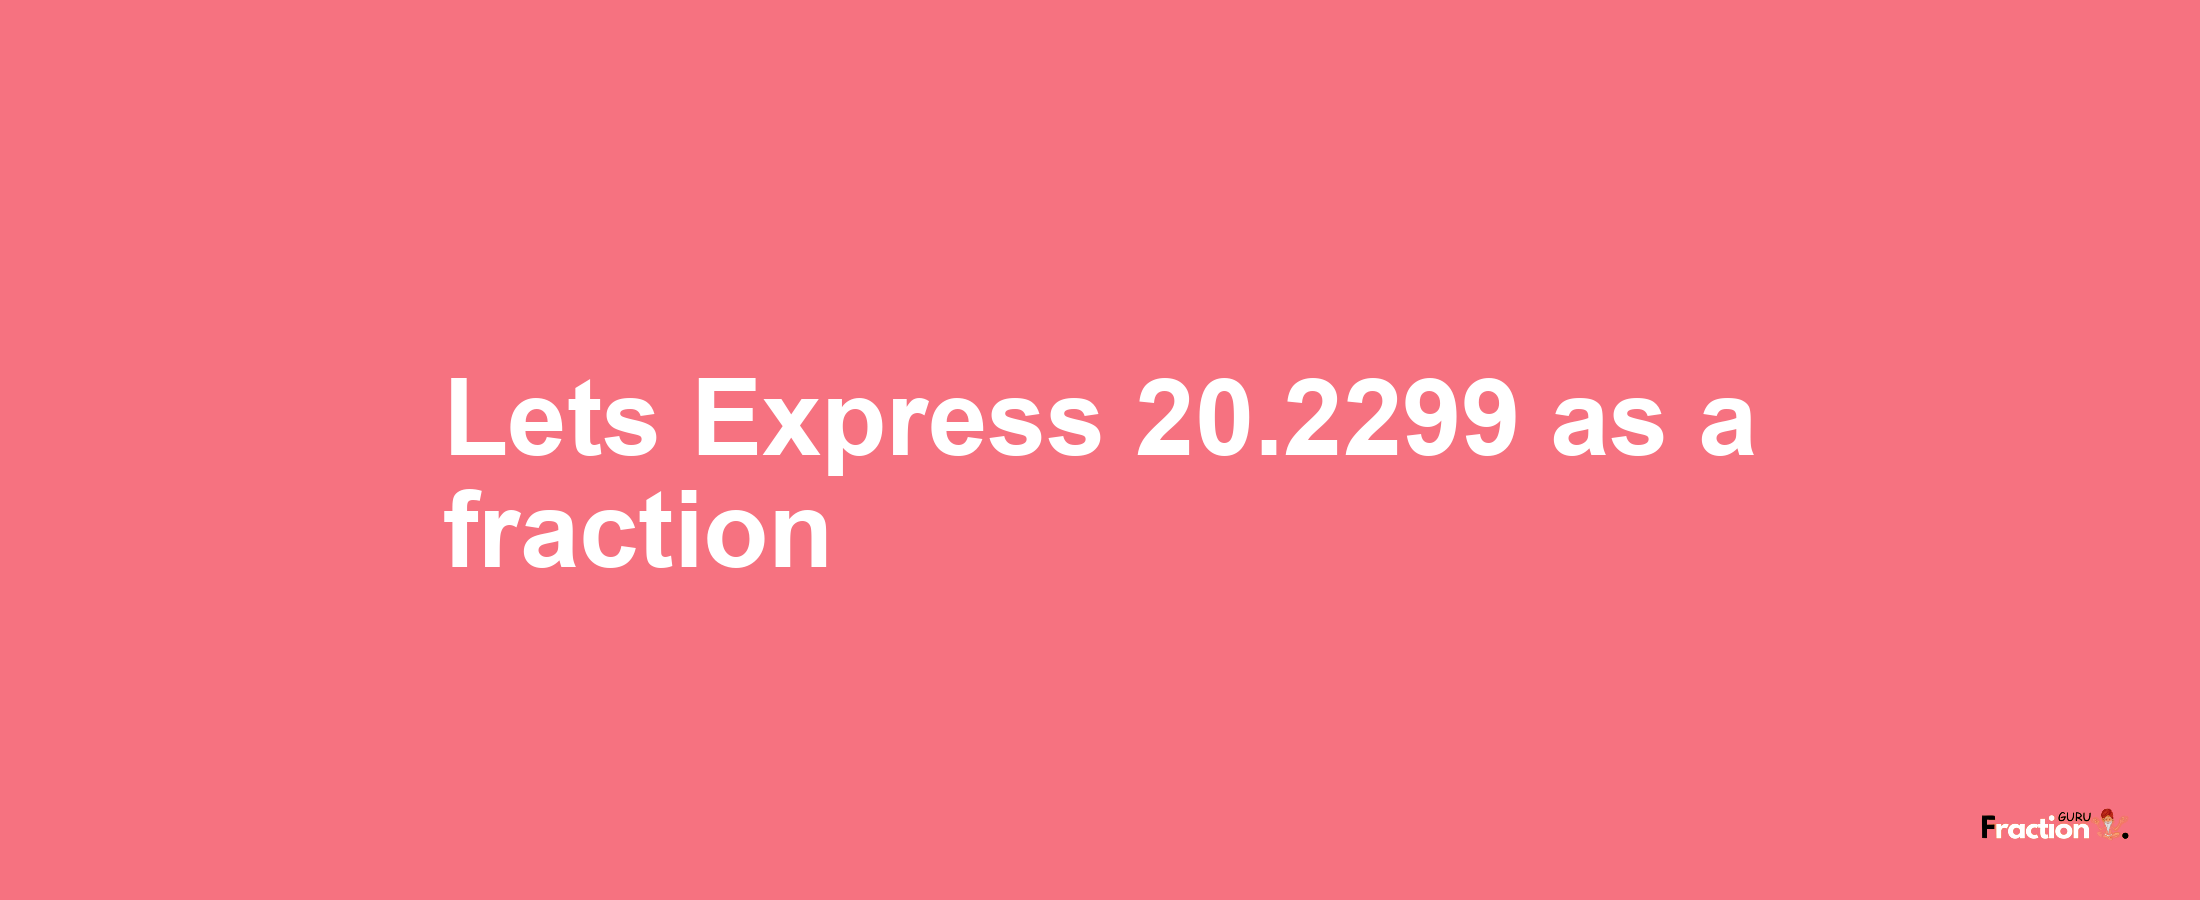 Lets Express 20.2299 as afraction